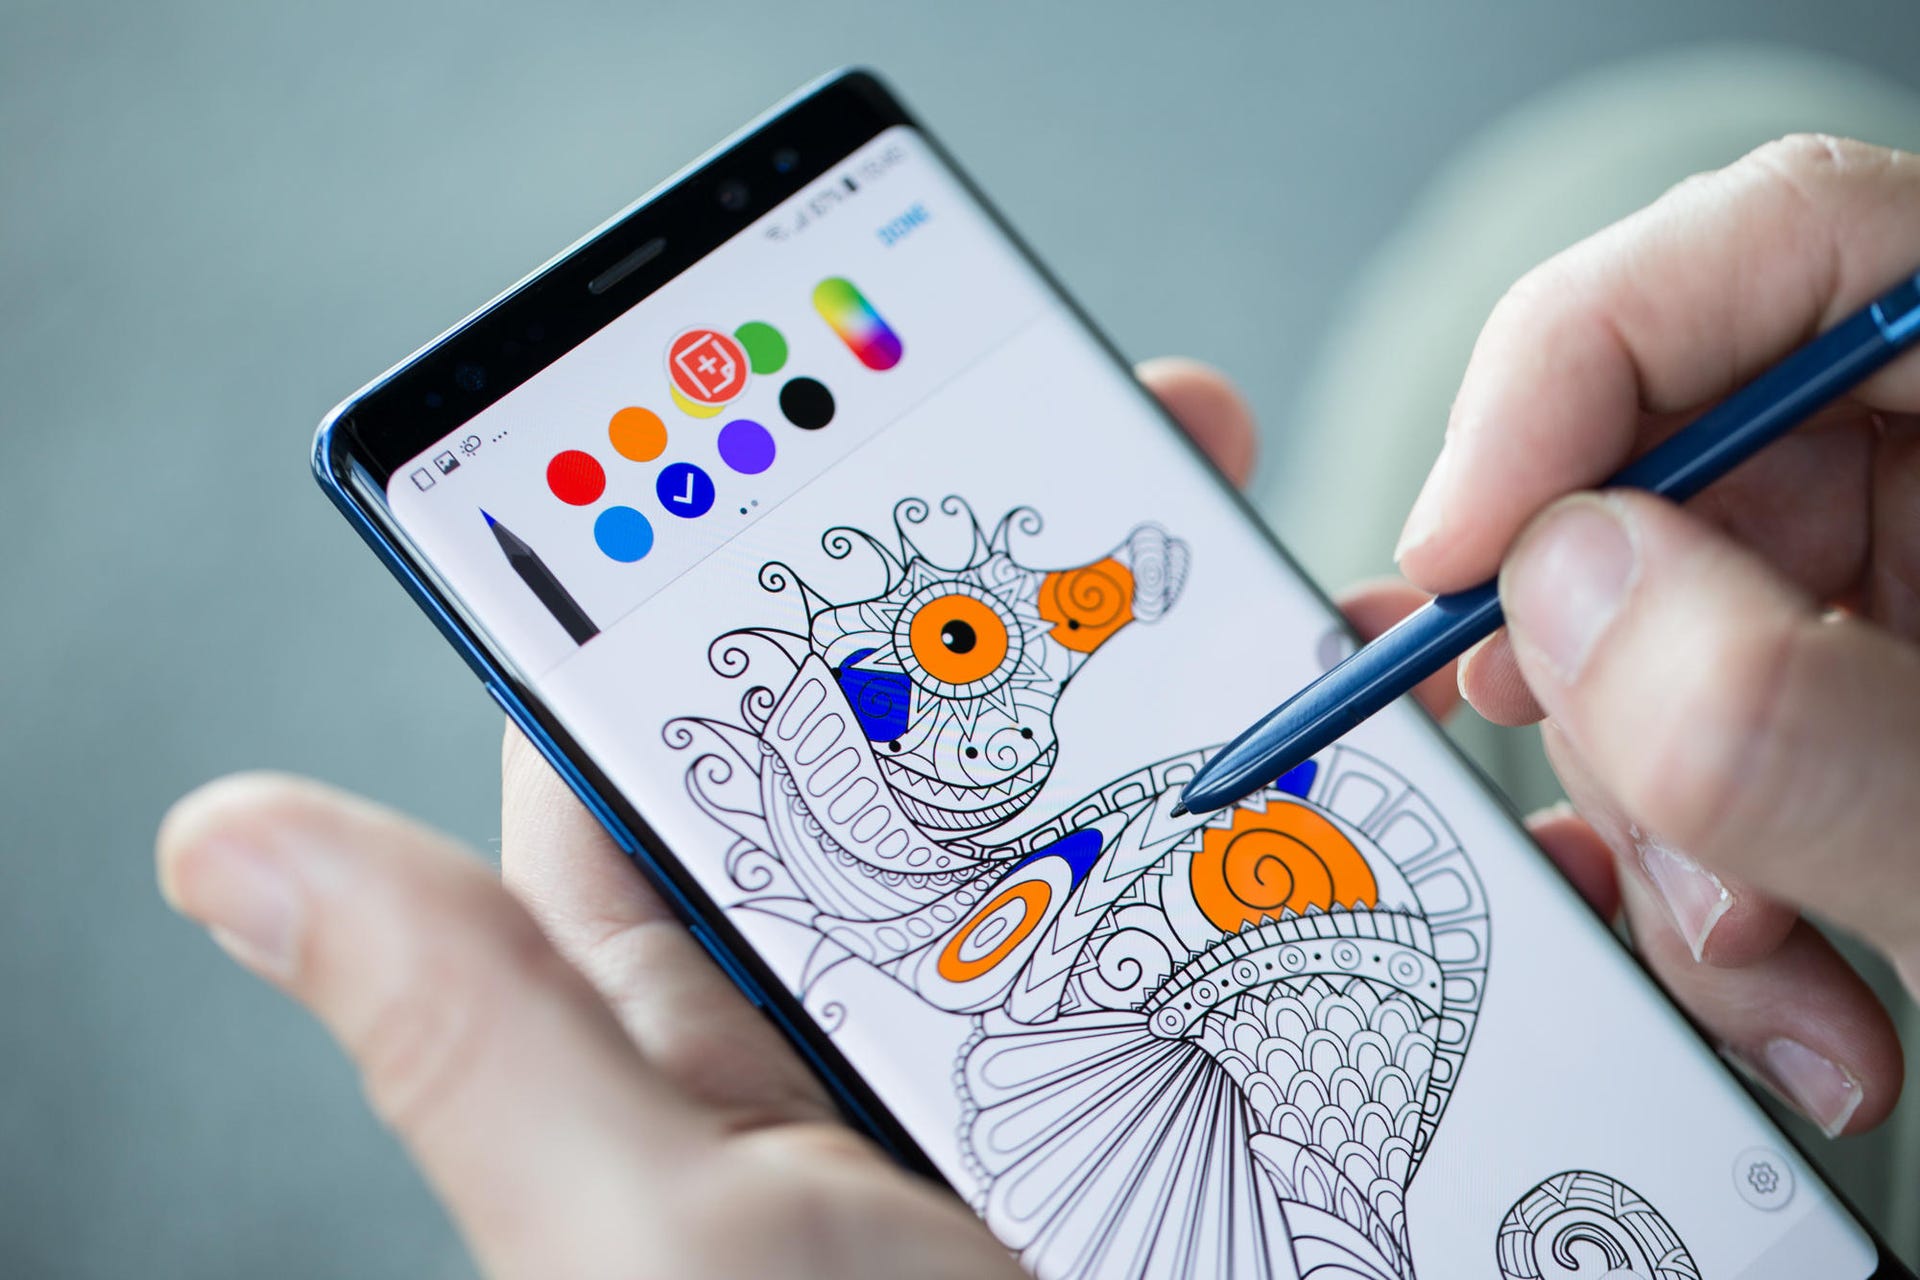 samsung-galaxy-note-8-s-pen-features-9